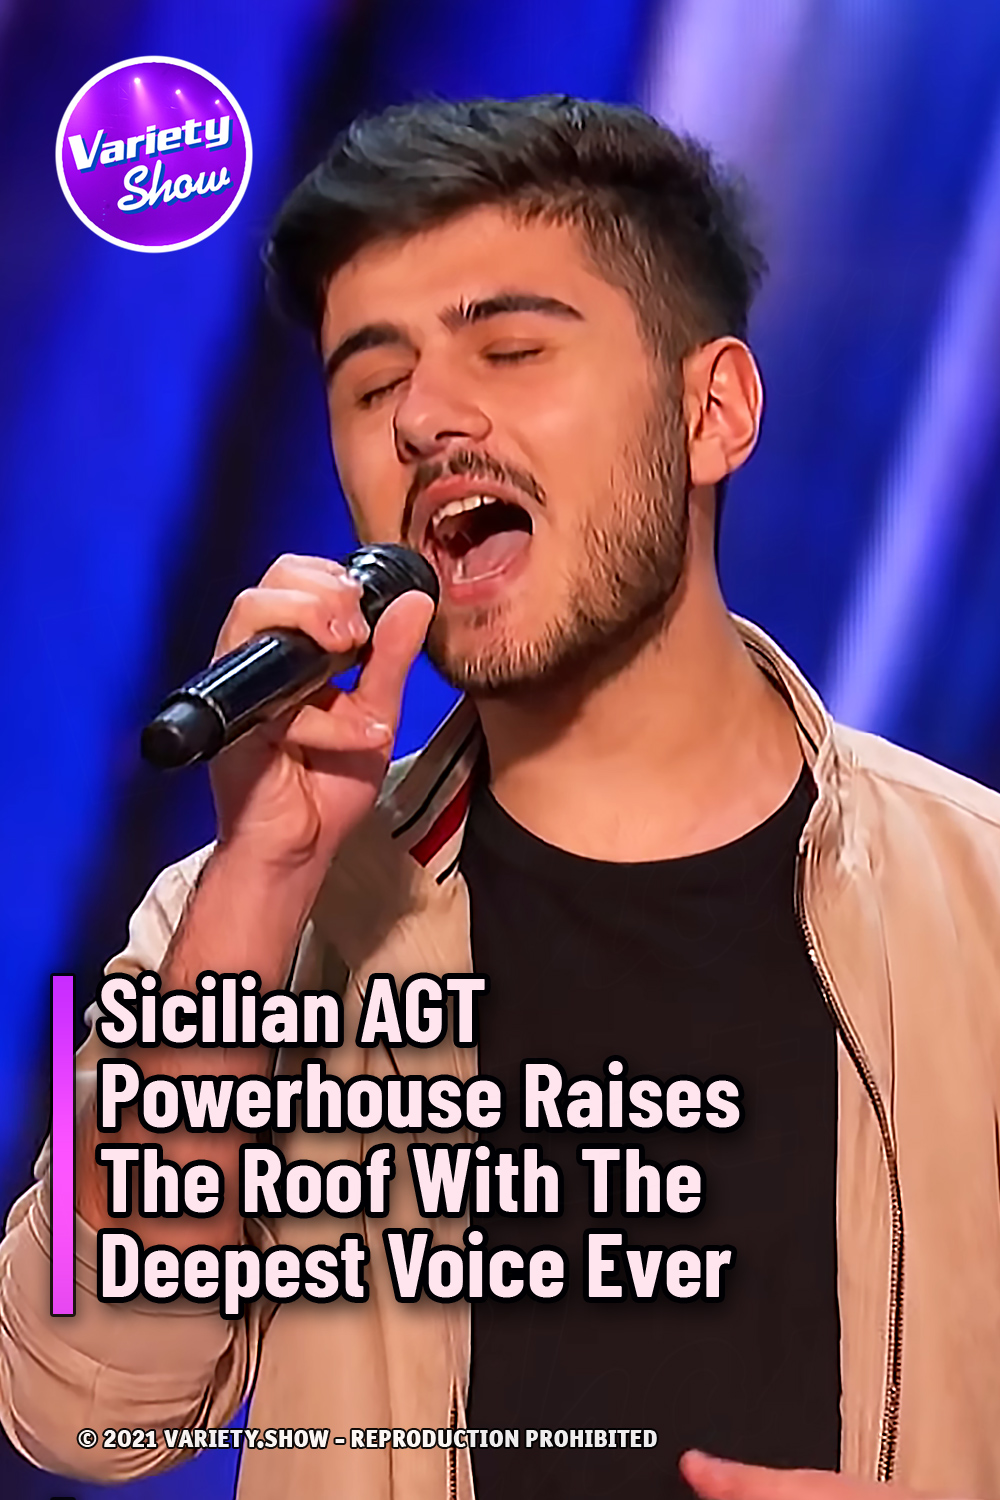 Sicilian AGT Powerhouse Raises The Roof With The Deepest Voice Ever